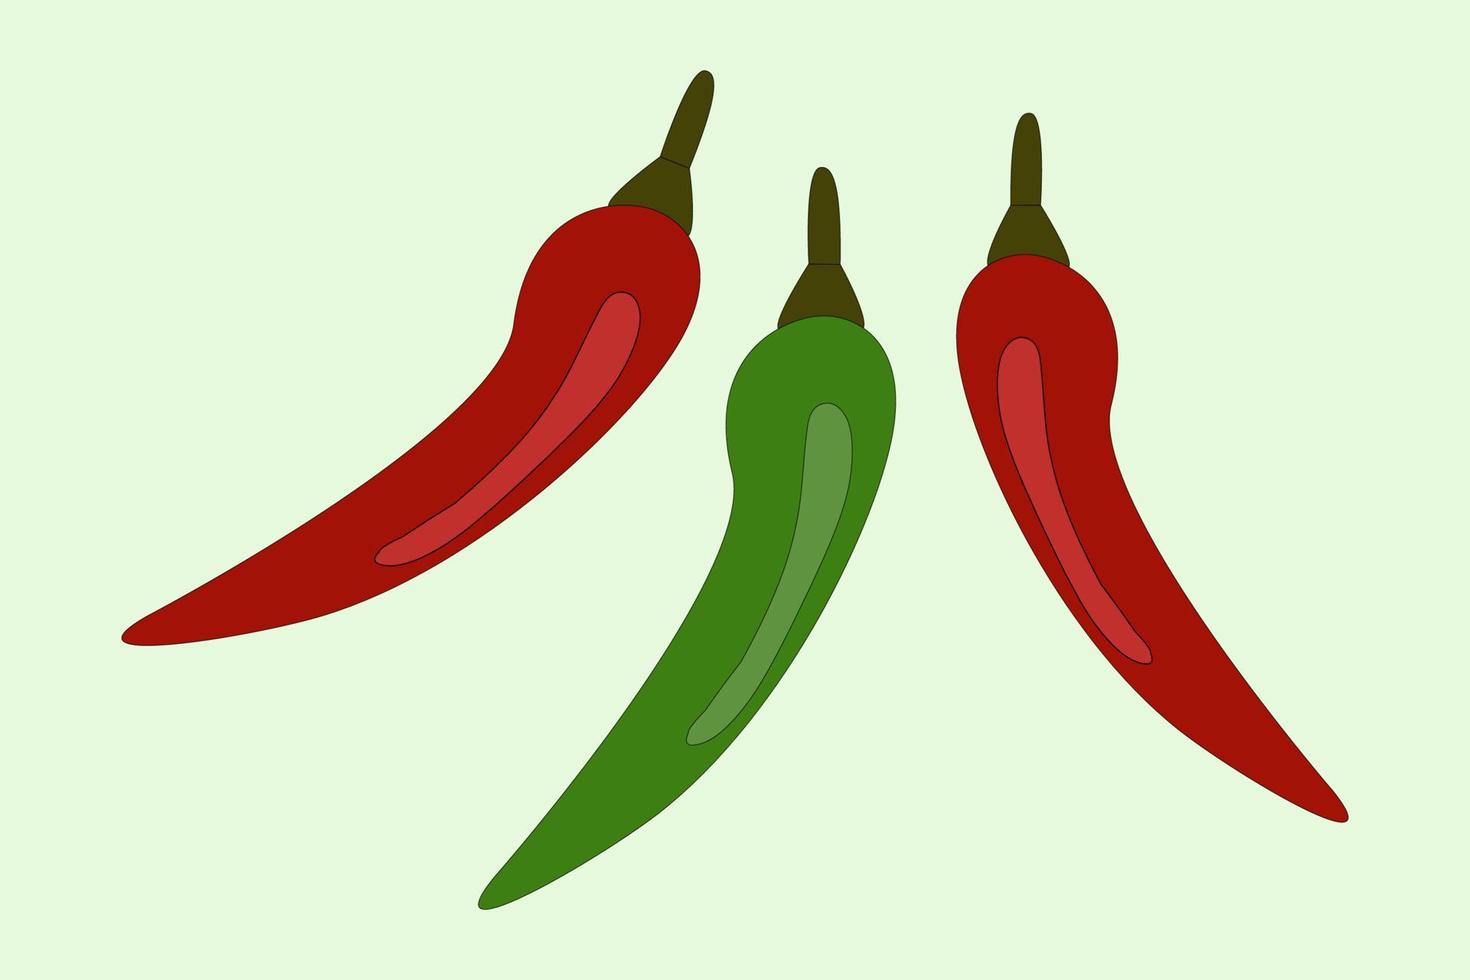 Branch of hot chili pepper red and green color, isolated vector image, icons, harvest, vegetables, seedlings, plant seeds. Healthy food  vegetarian